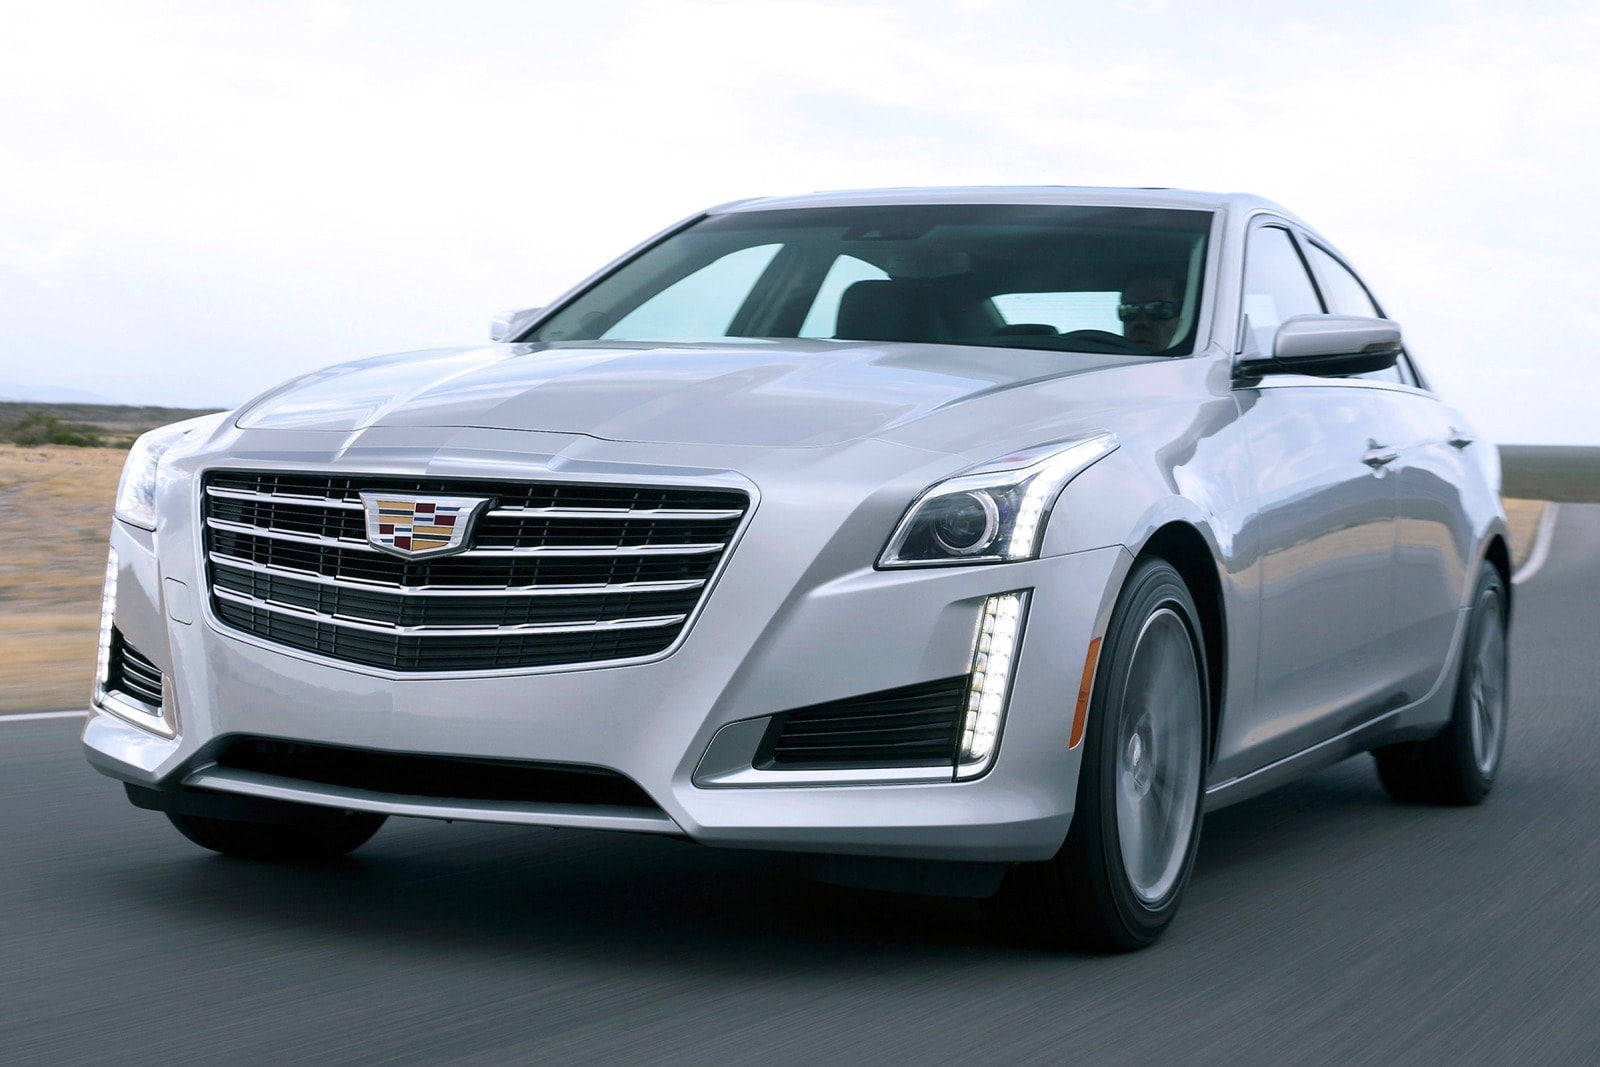 2017 Cadillac CTS Review & Ratings | Edmunds